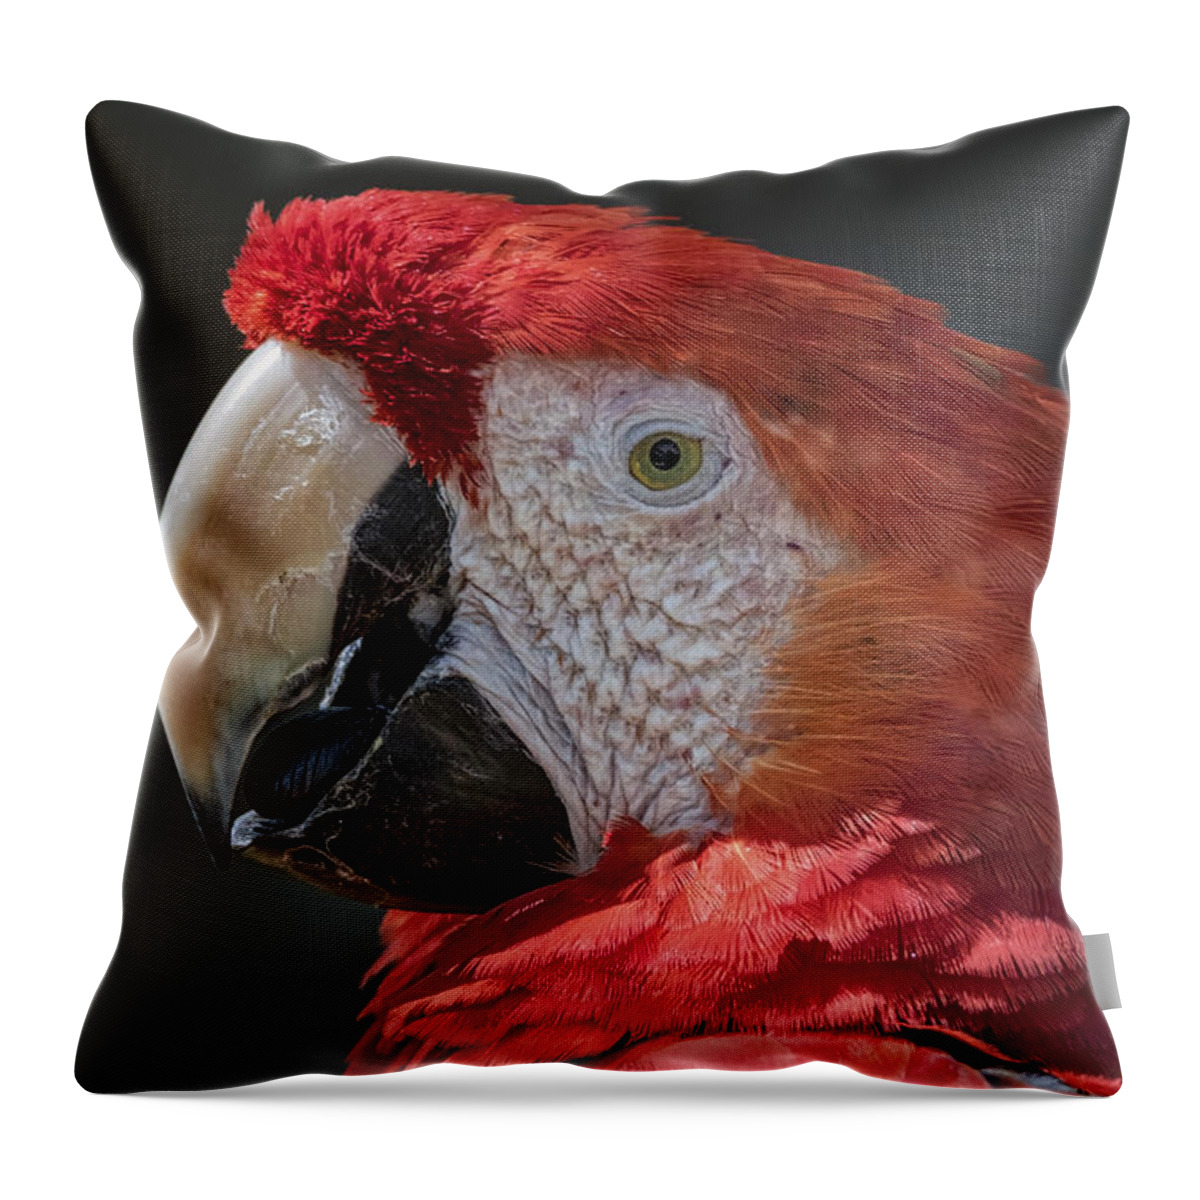 Macaw Parrot Throw Pillow featuring the photograph Scarlet Macaw Portrait by Mitch Shindelbower